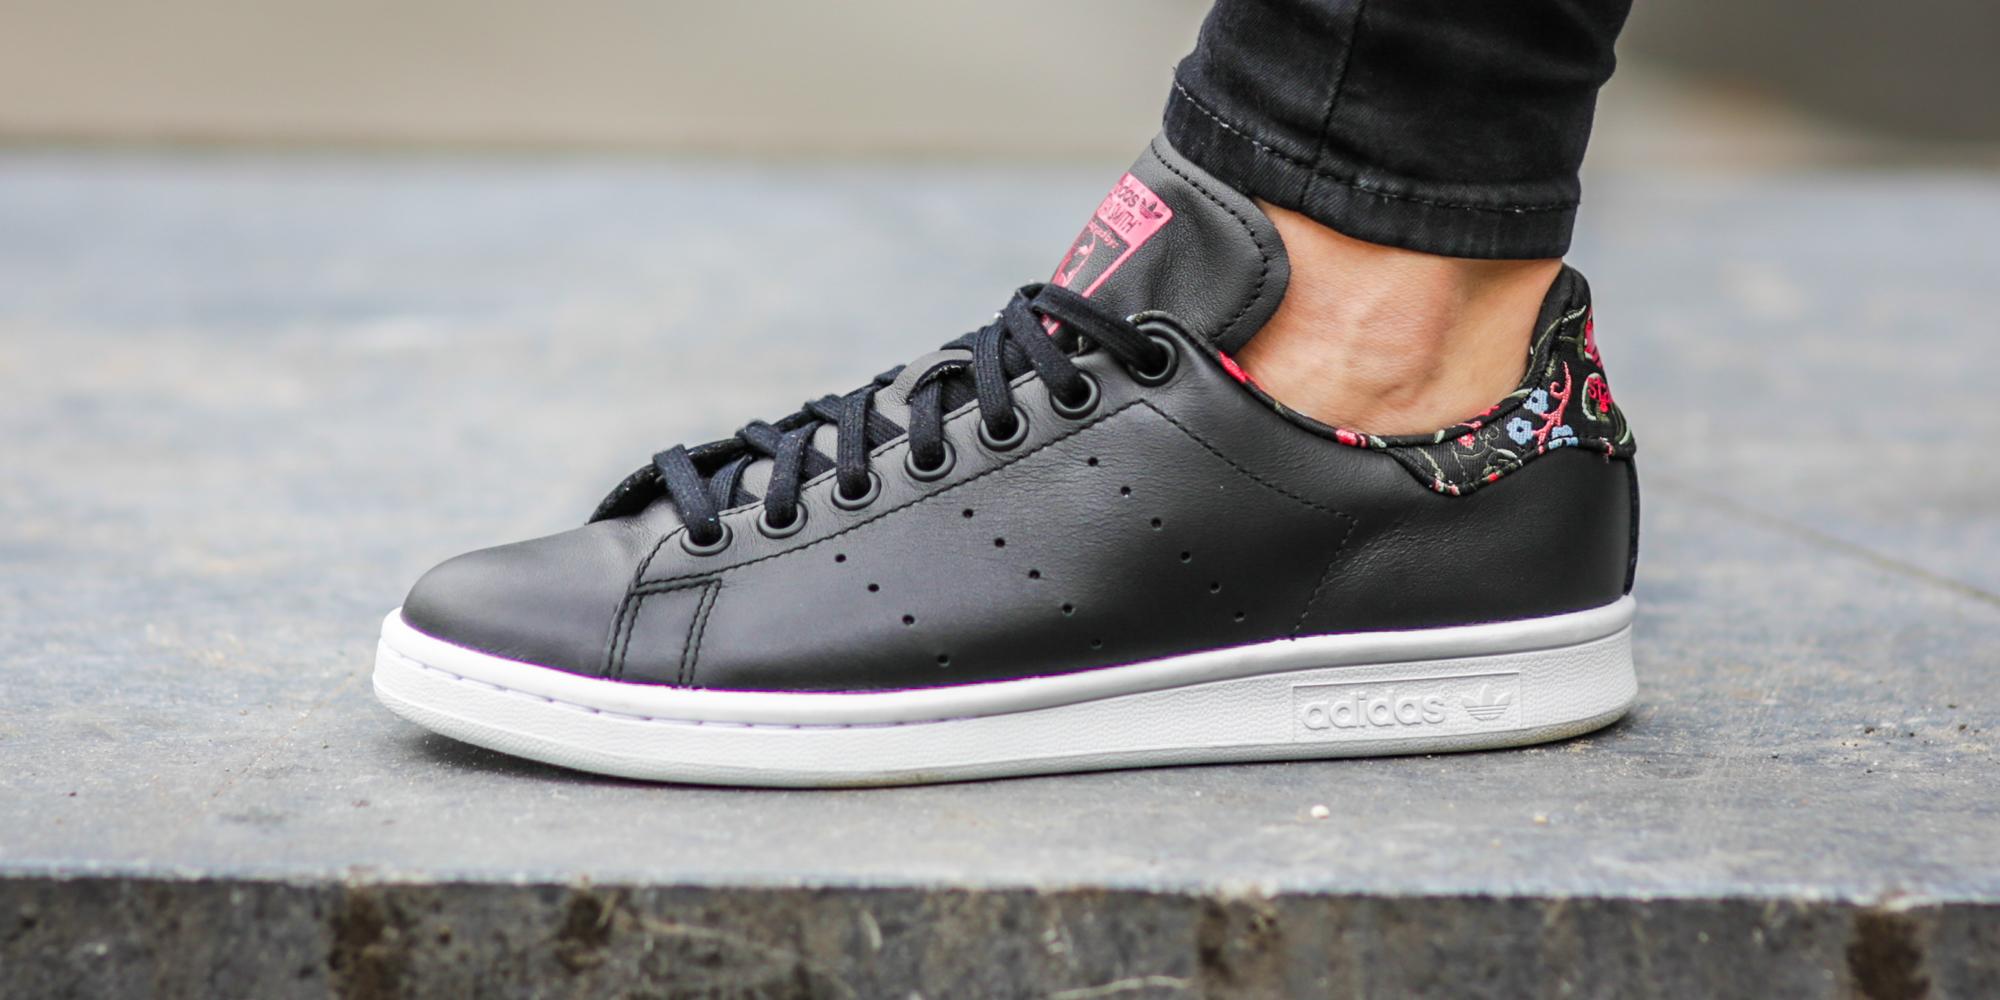 Foot Locker EU on "Release! adidas Originals Stan Smith 'Moscow pack now available in and online http://t.co/yvsJwR6DxC http://t.co/uMHPBZ1o2e" / Twitter